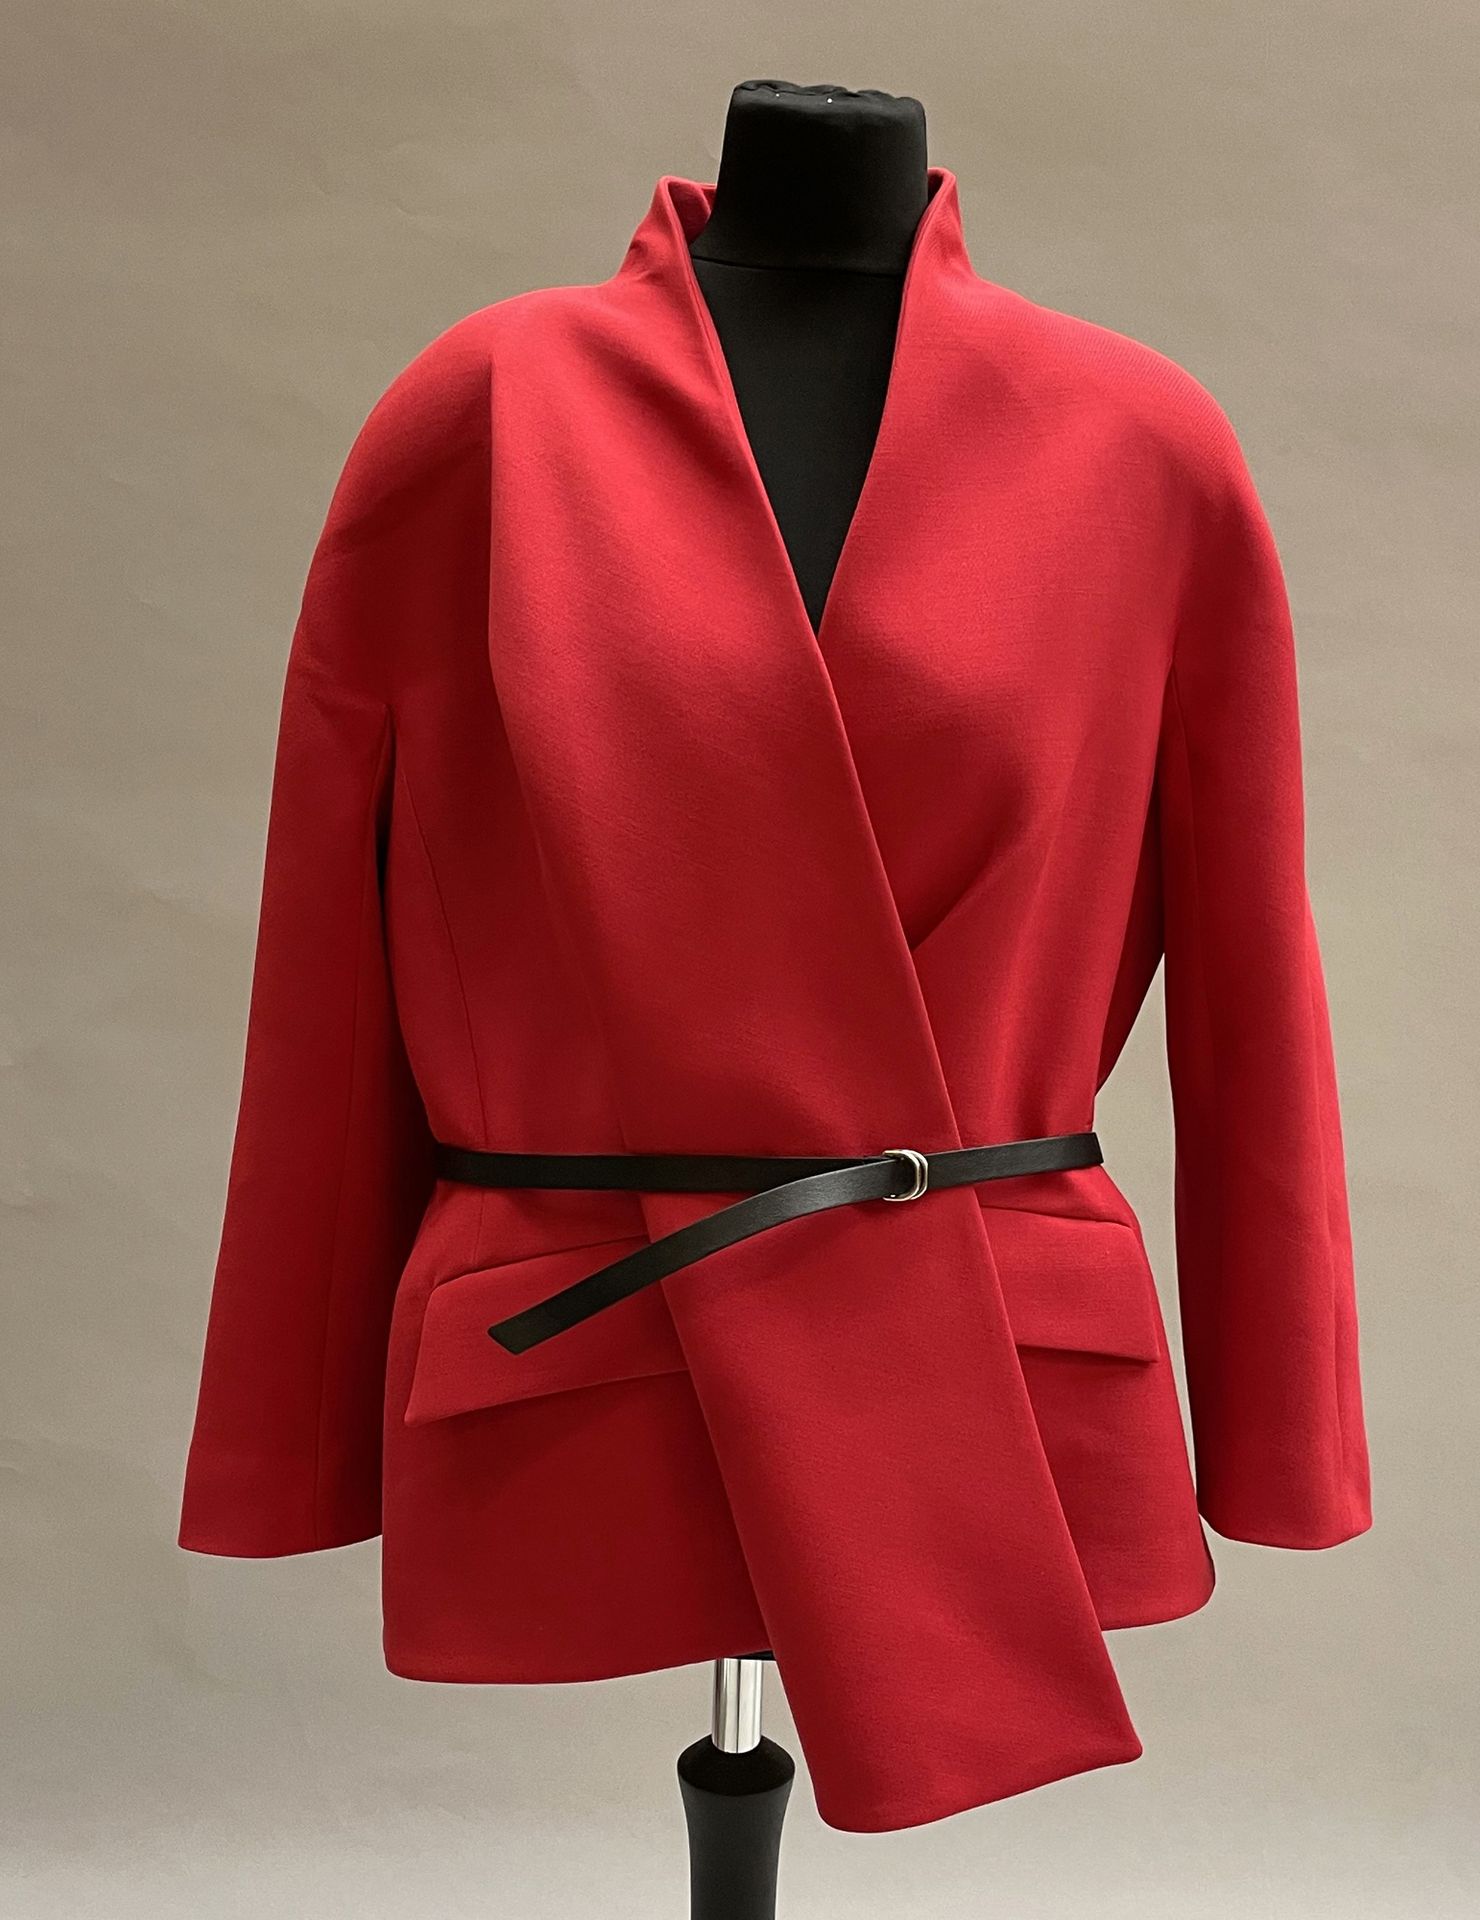 Null CHRISTIAN DIOR, red cotton jacket, black leather belt. Very good condition.&hellip;